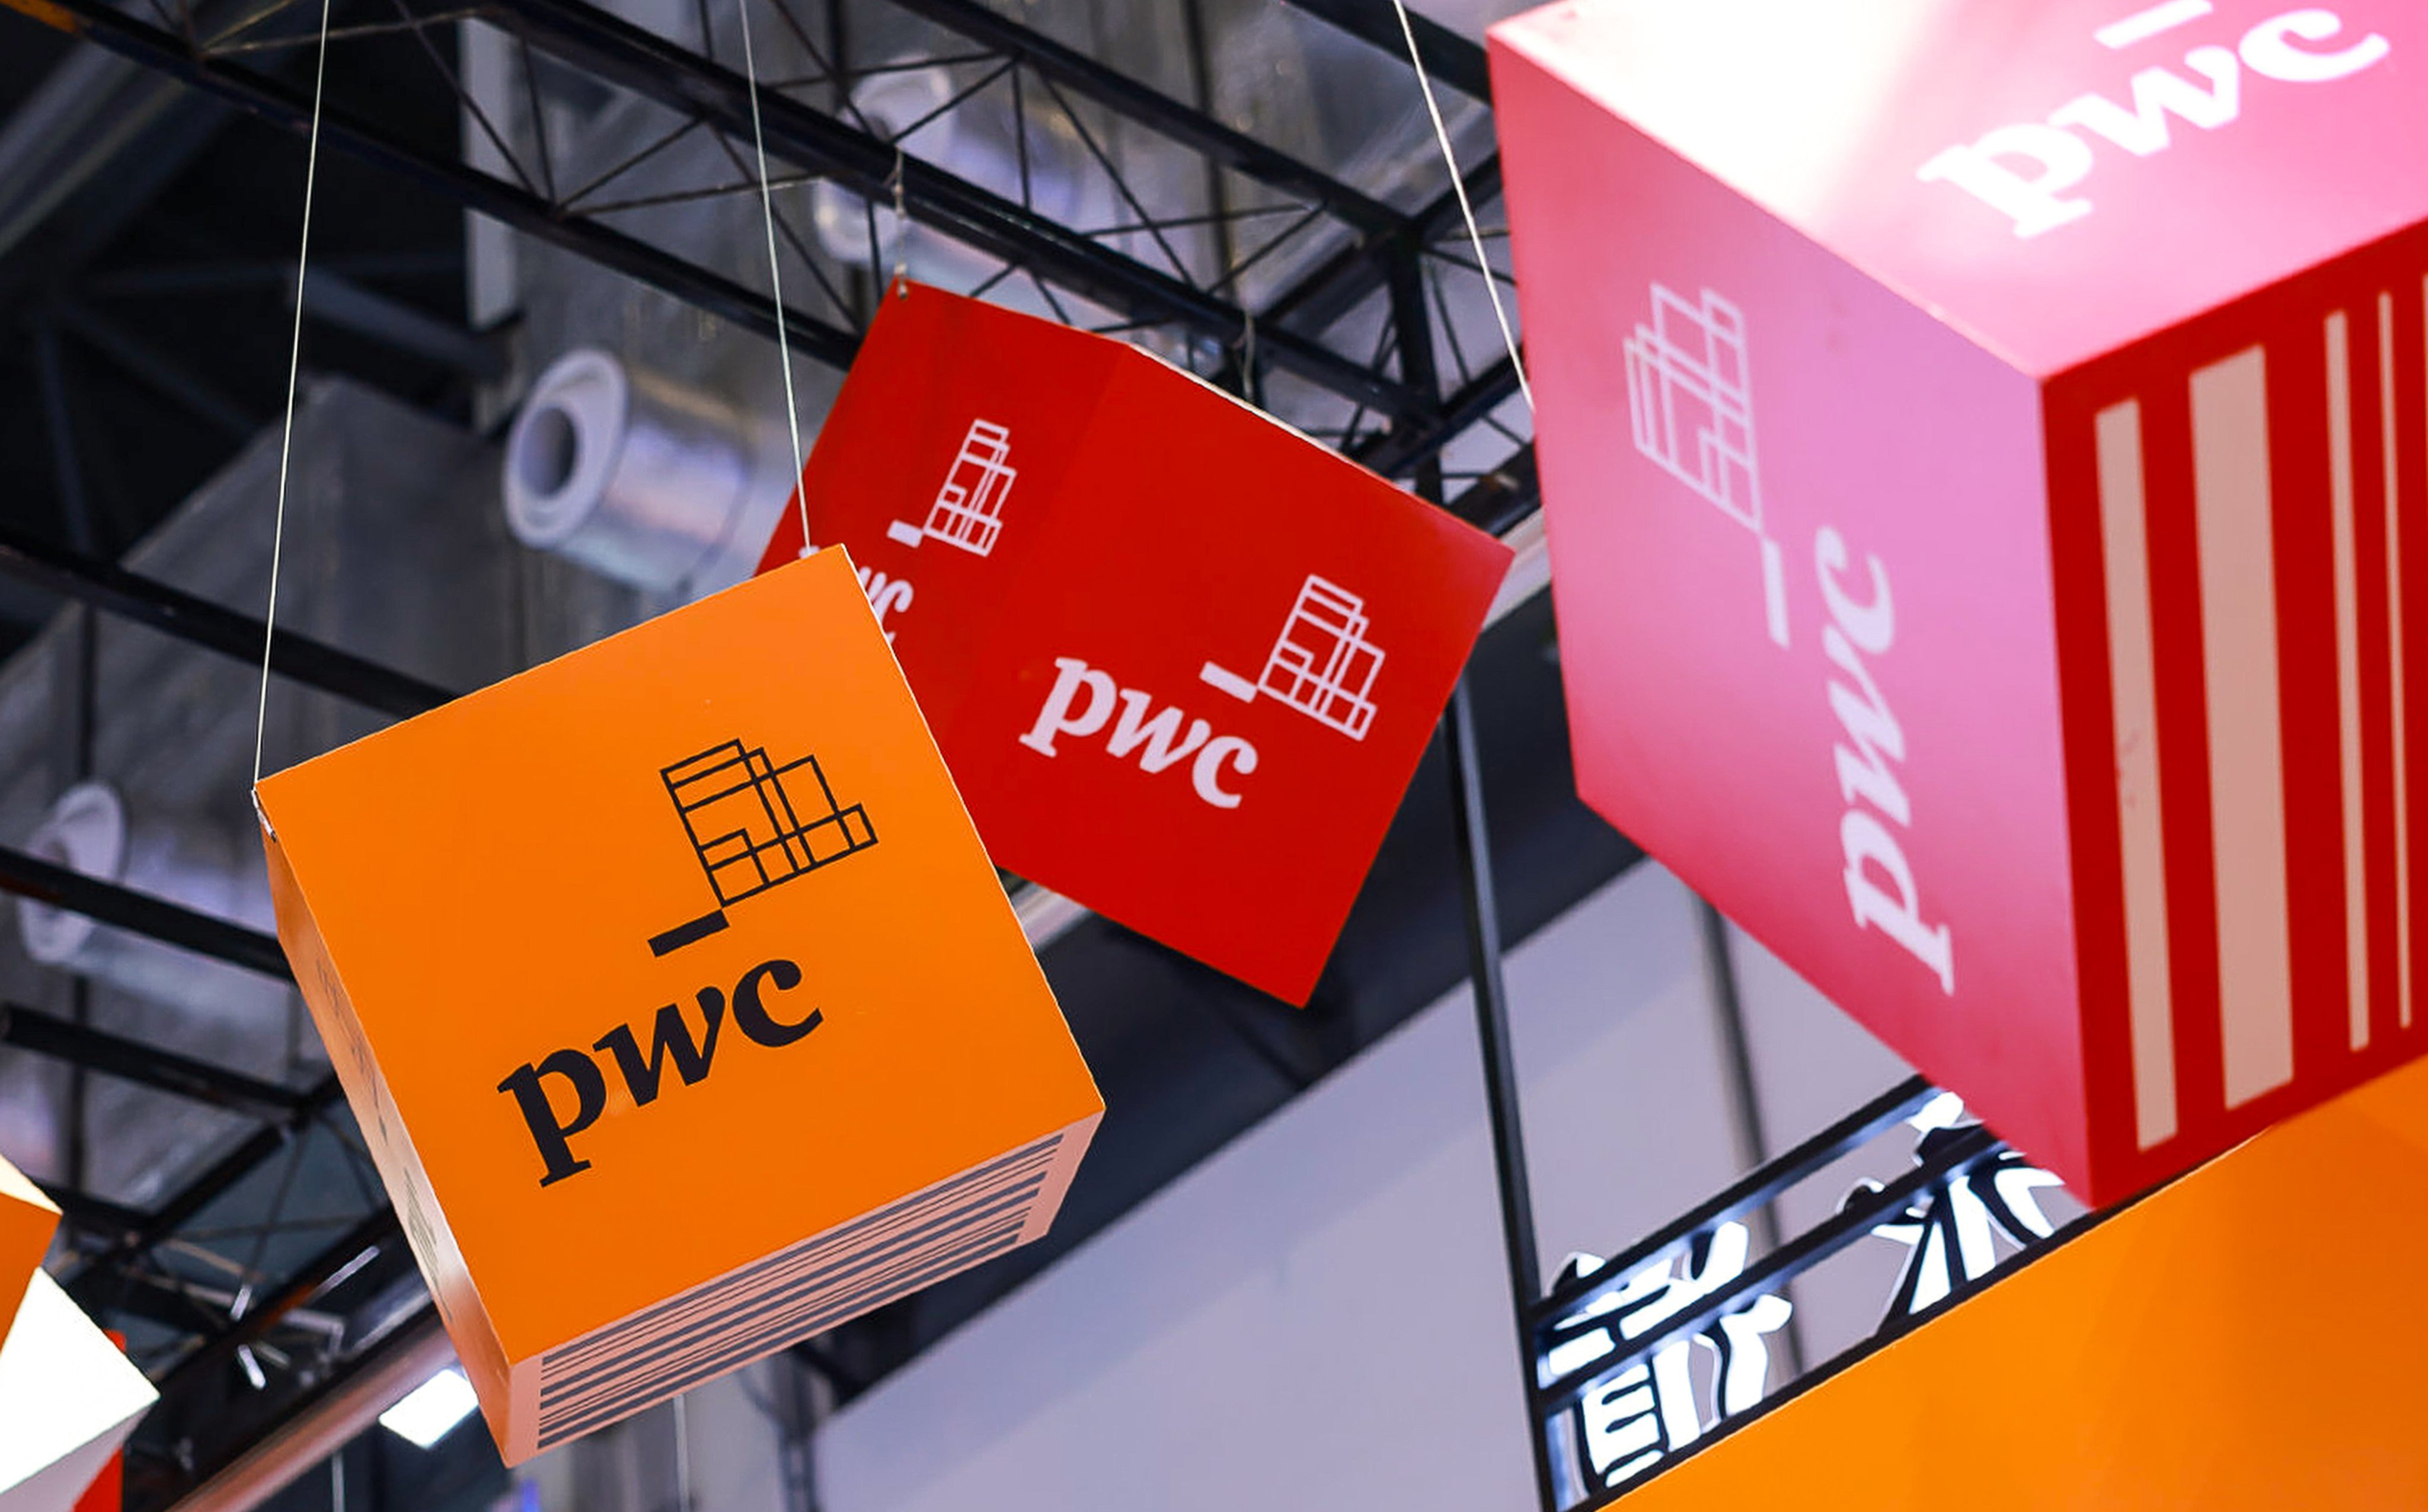 The logo of big-four accounting firm PricewaterhouseCoopers. Photo: Weibo